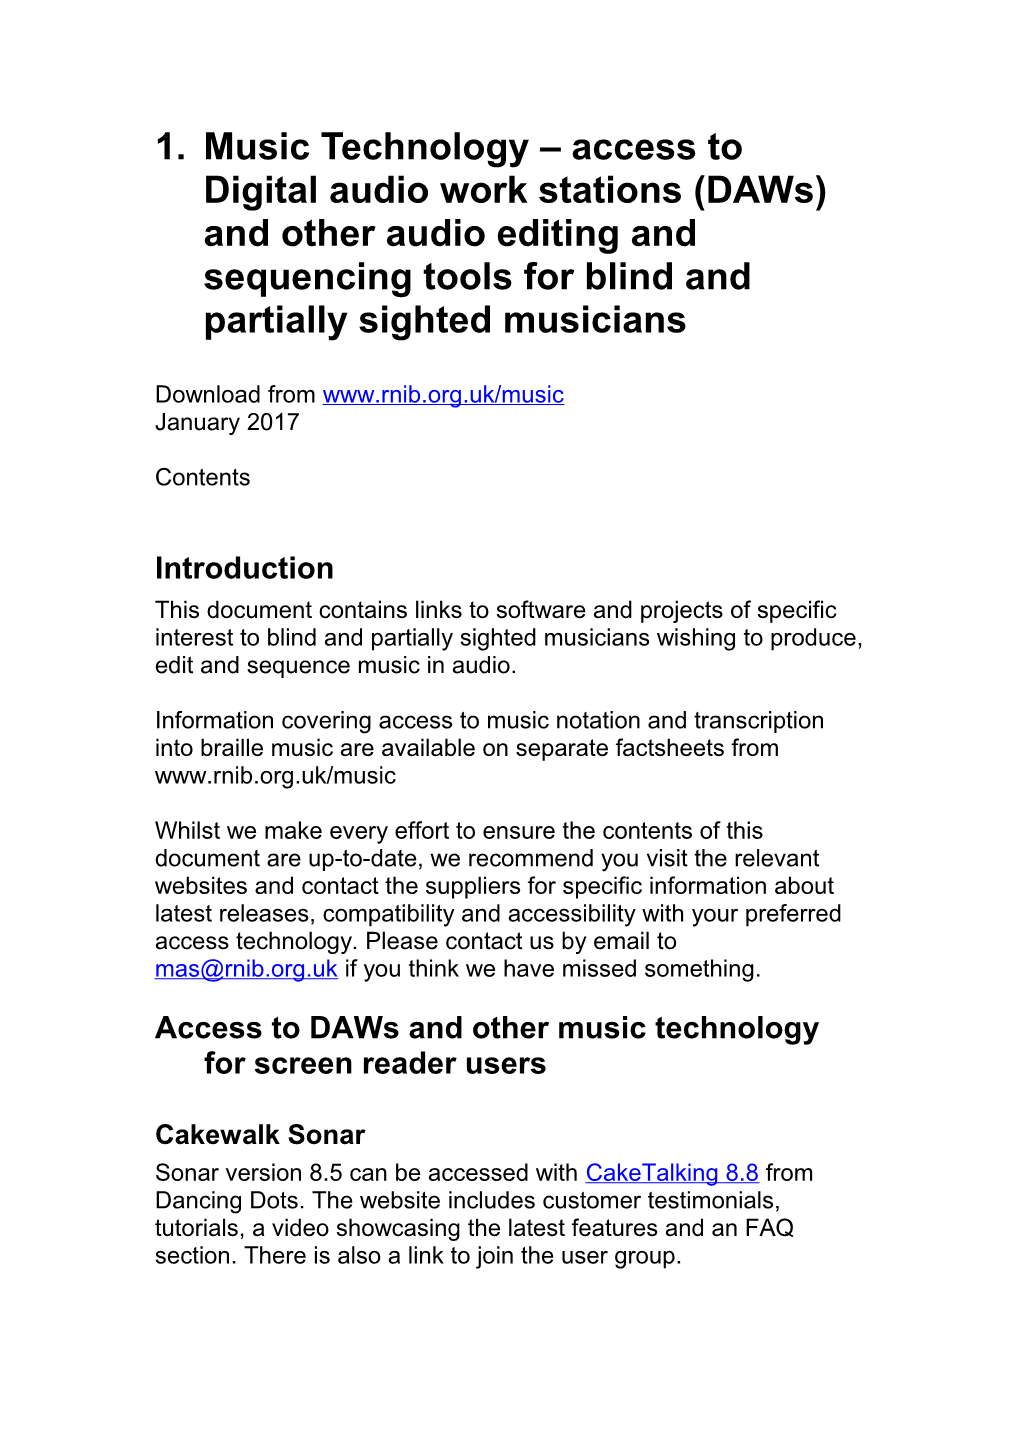 Music Technology Access to Digital Audio Work Stations (Daws) and Other Audio Editing And